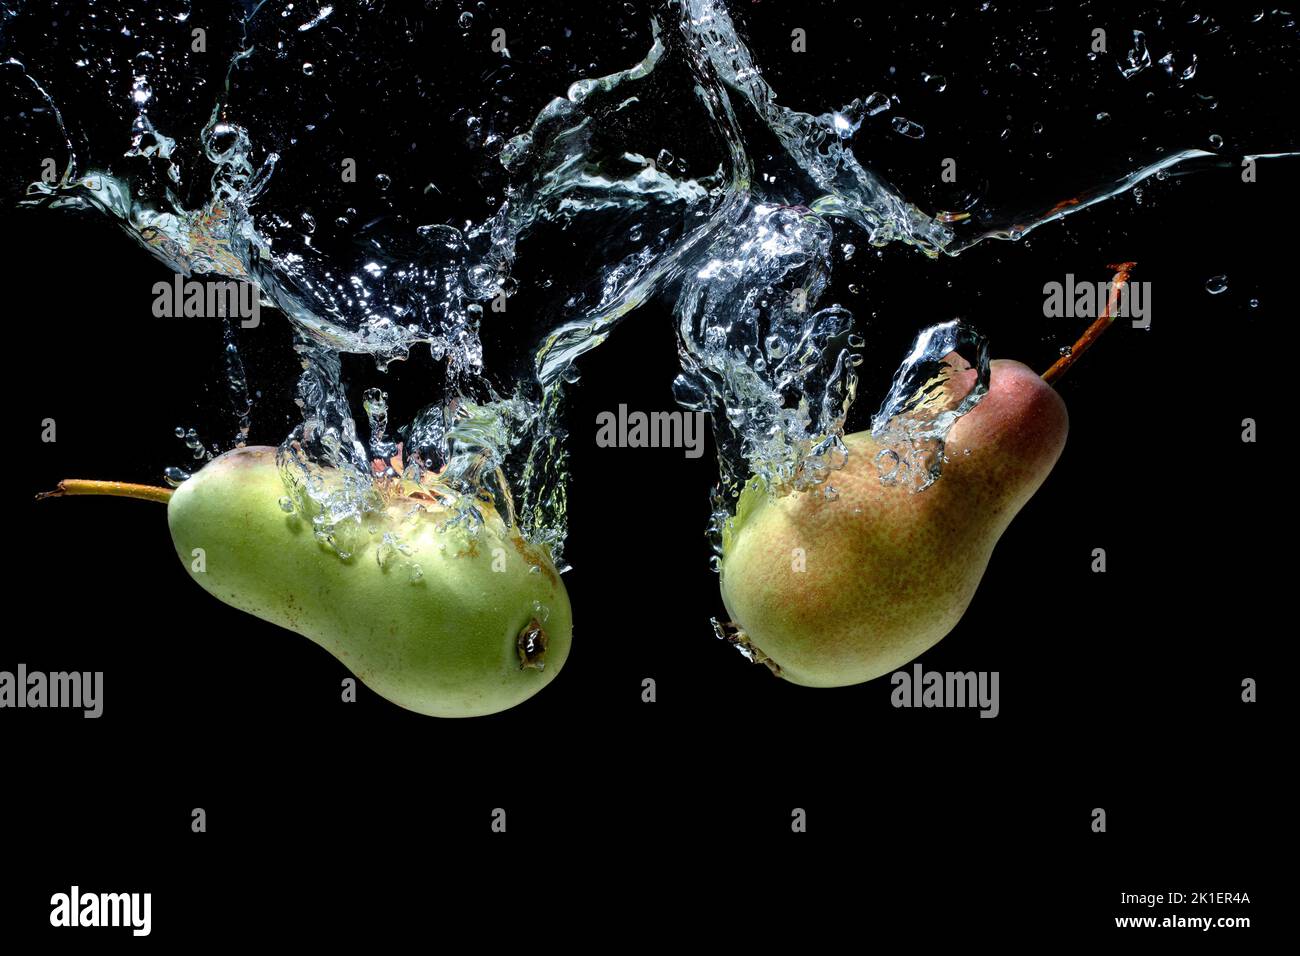 Two fresh pears falling underwater with splashes isolated on black background. Stock Photo